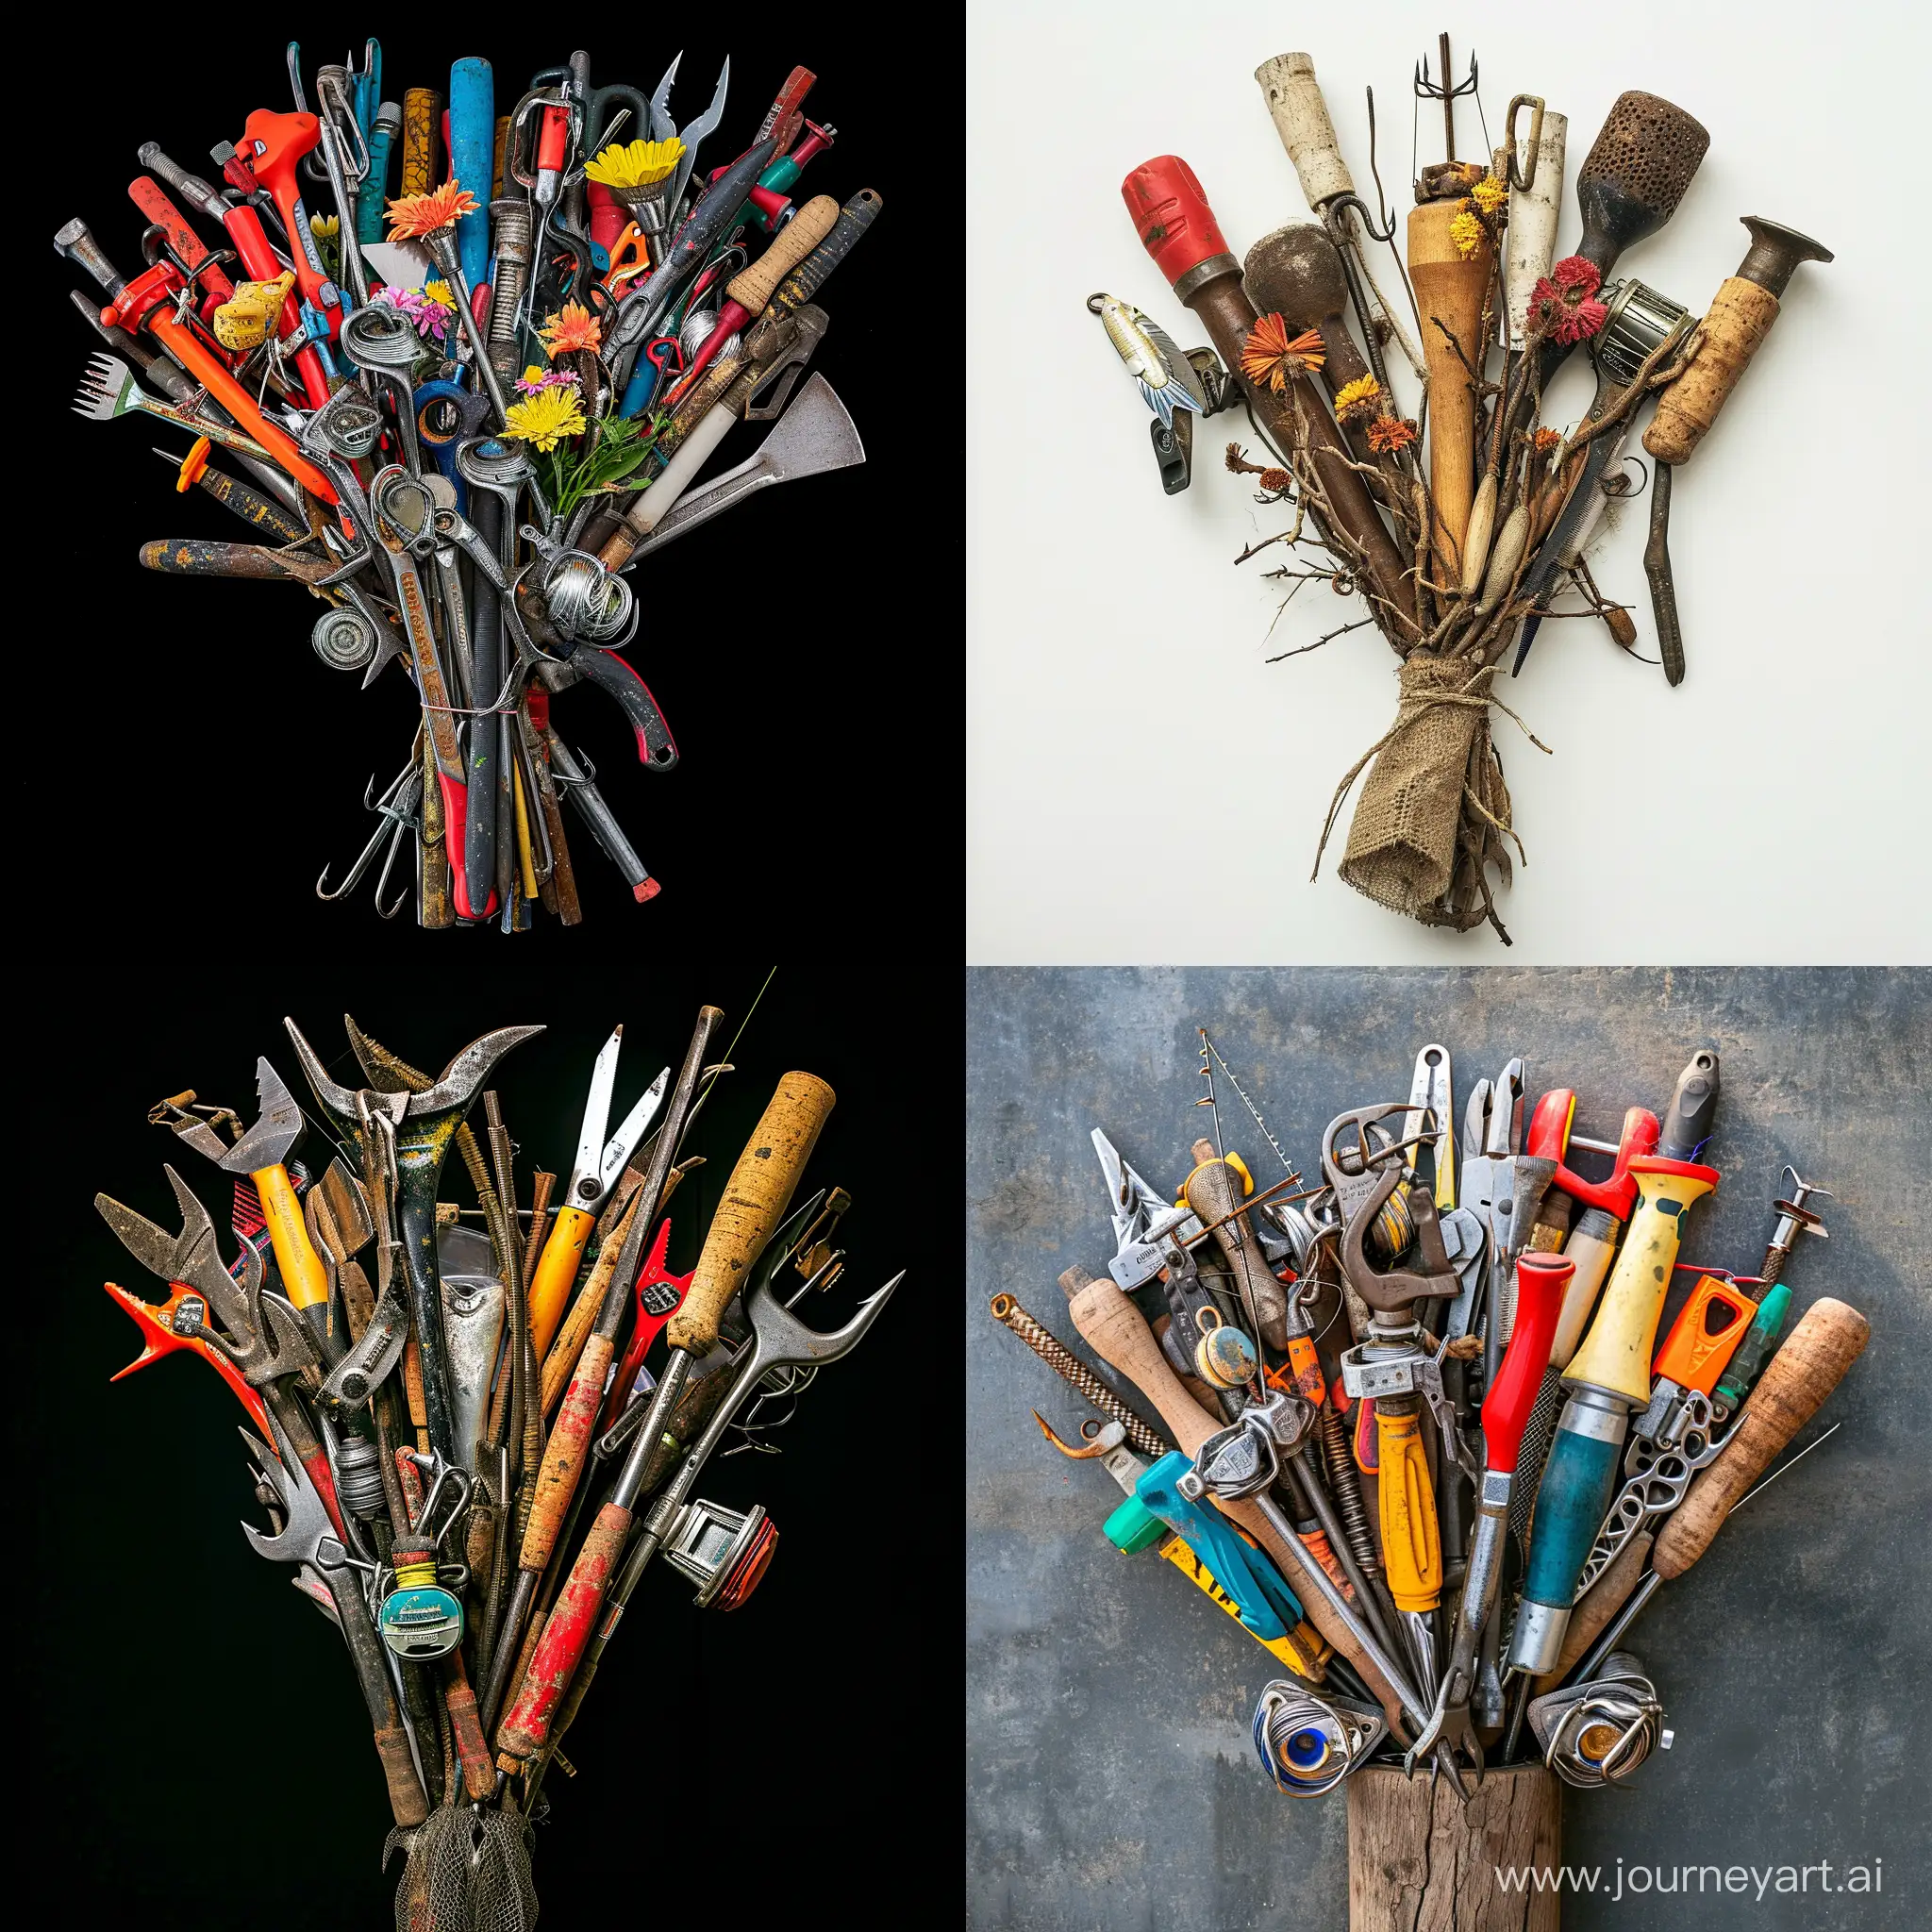 Vibrant-Fishing-Tool-Bouquet-Creative-Construction-in-11-Aspect-Ratio